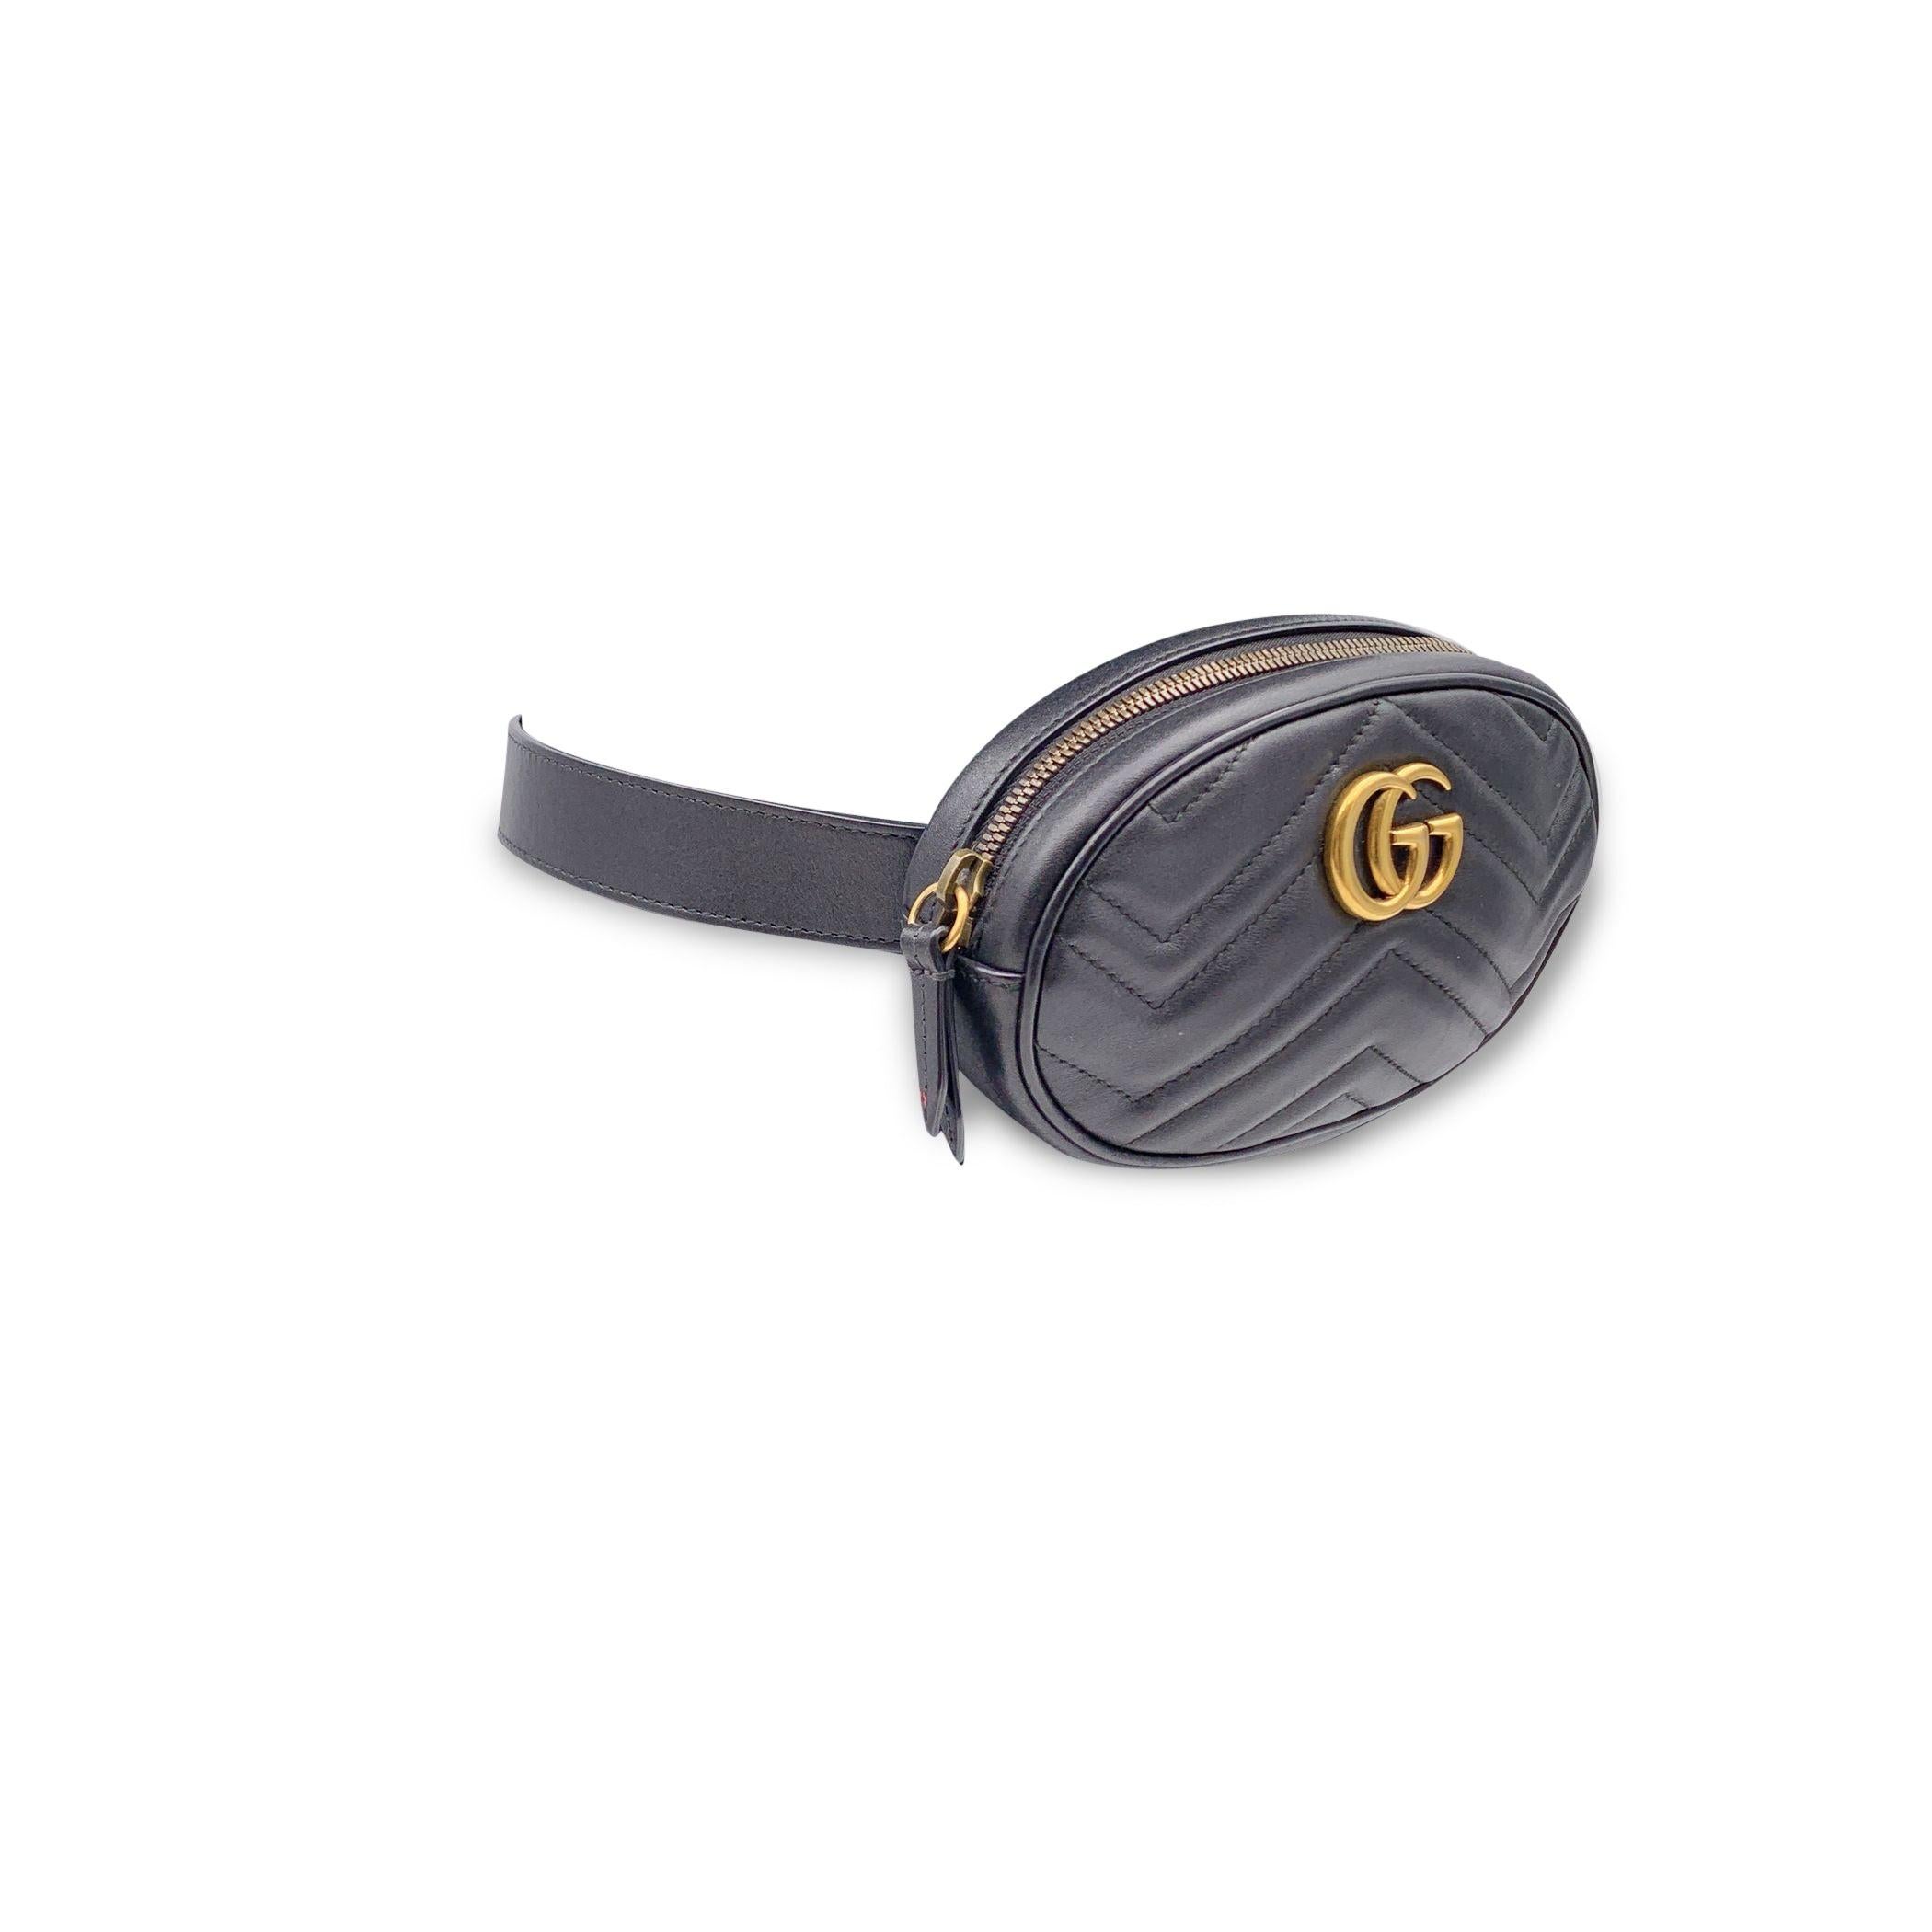 Women's Gucci Black Quilted Leather Marmont GG Belt Waist Bag Size 65/26